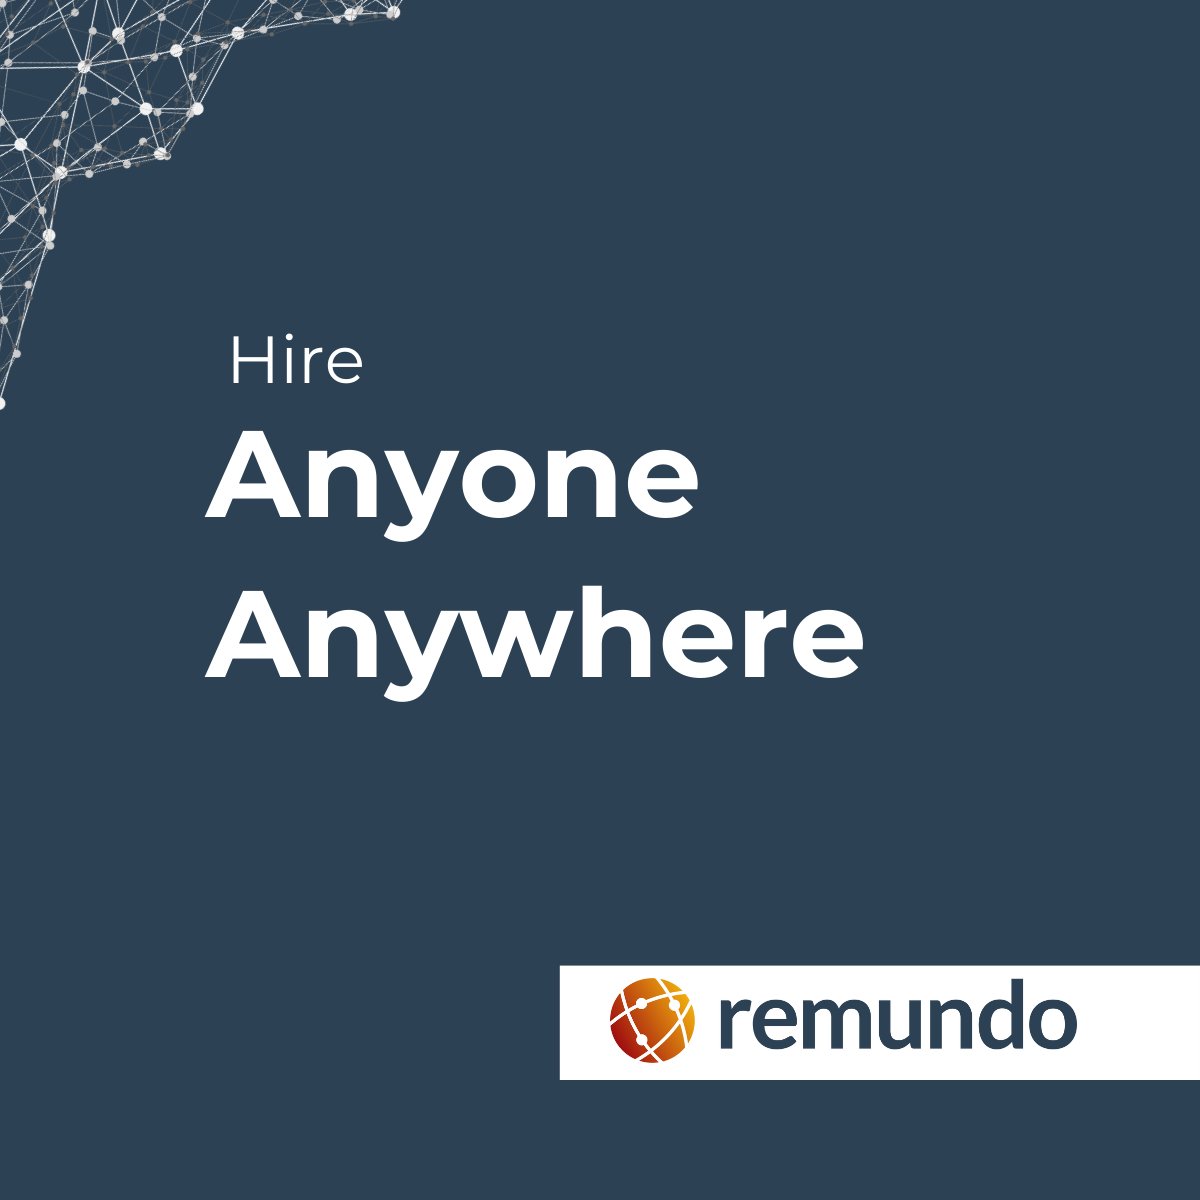 With Remundo Employer of Record services you really can hire anyone, anywhere. For more information or to get started visit: eu1.hubs.ly/H08BnPL0

#GlobalHiring #EmployerOfRecord #GlobalHR